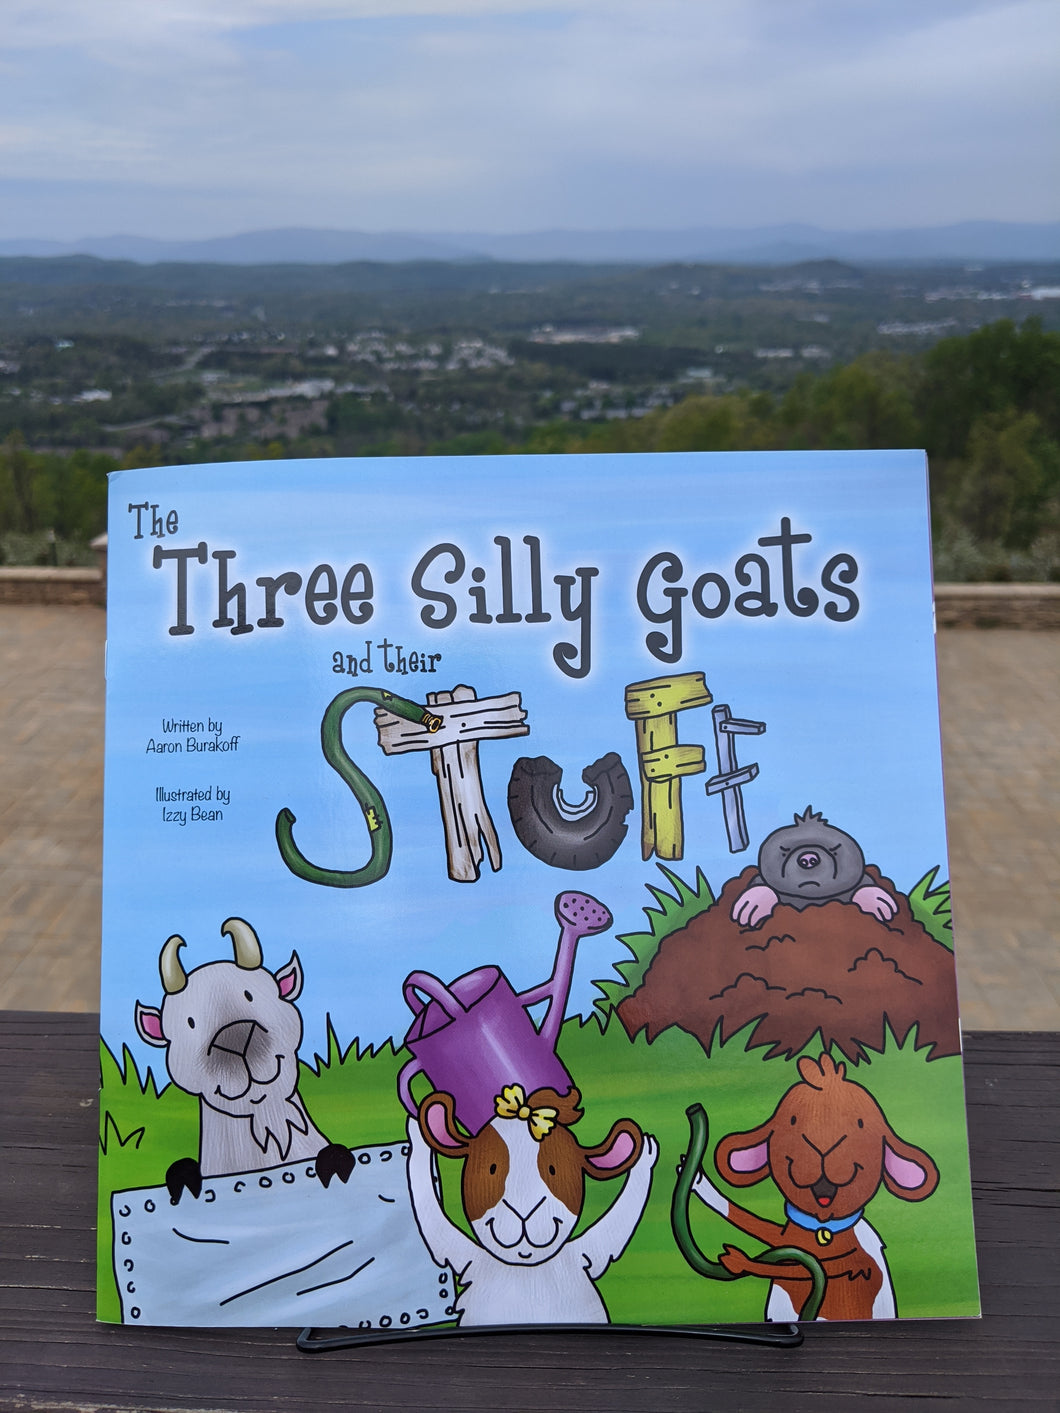 The Three Silly Goats